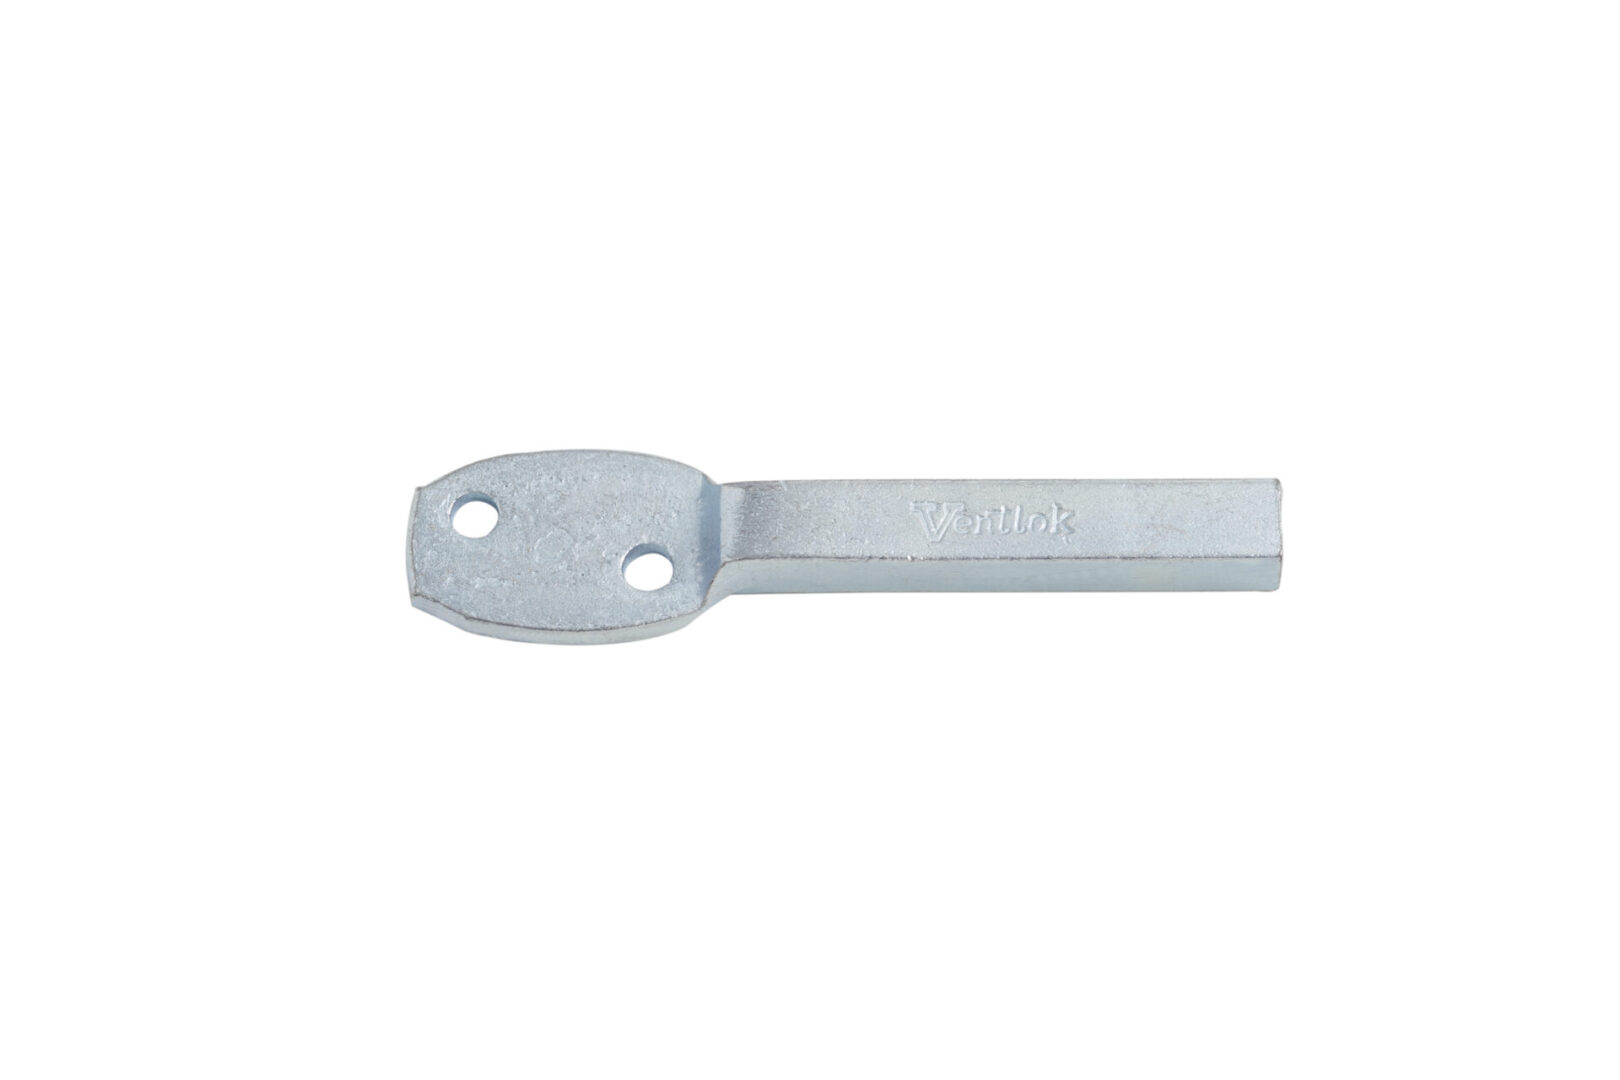 A metal key with a flat handle and the brand name "637 SQUARE END BEARING" embossed on it, isolated on a white background.